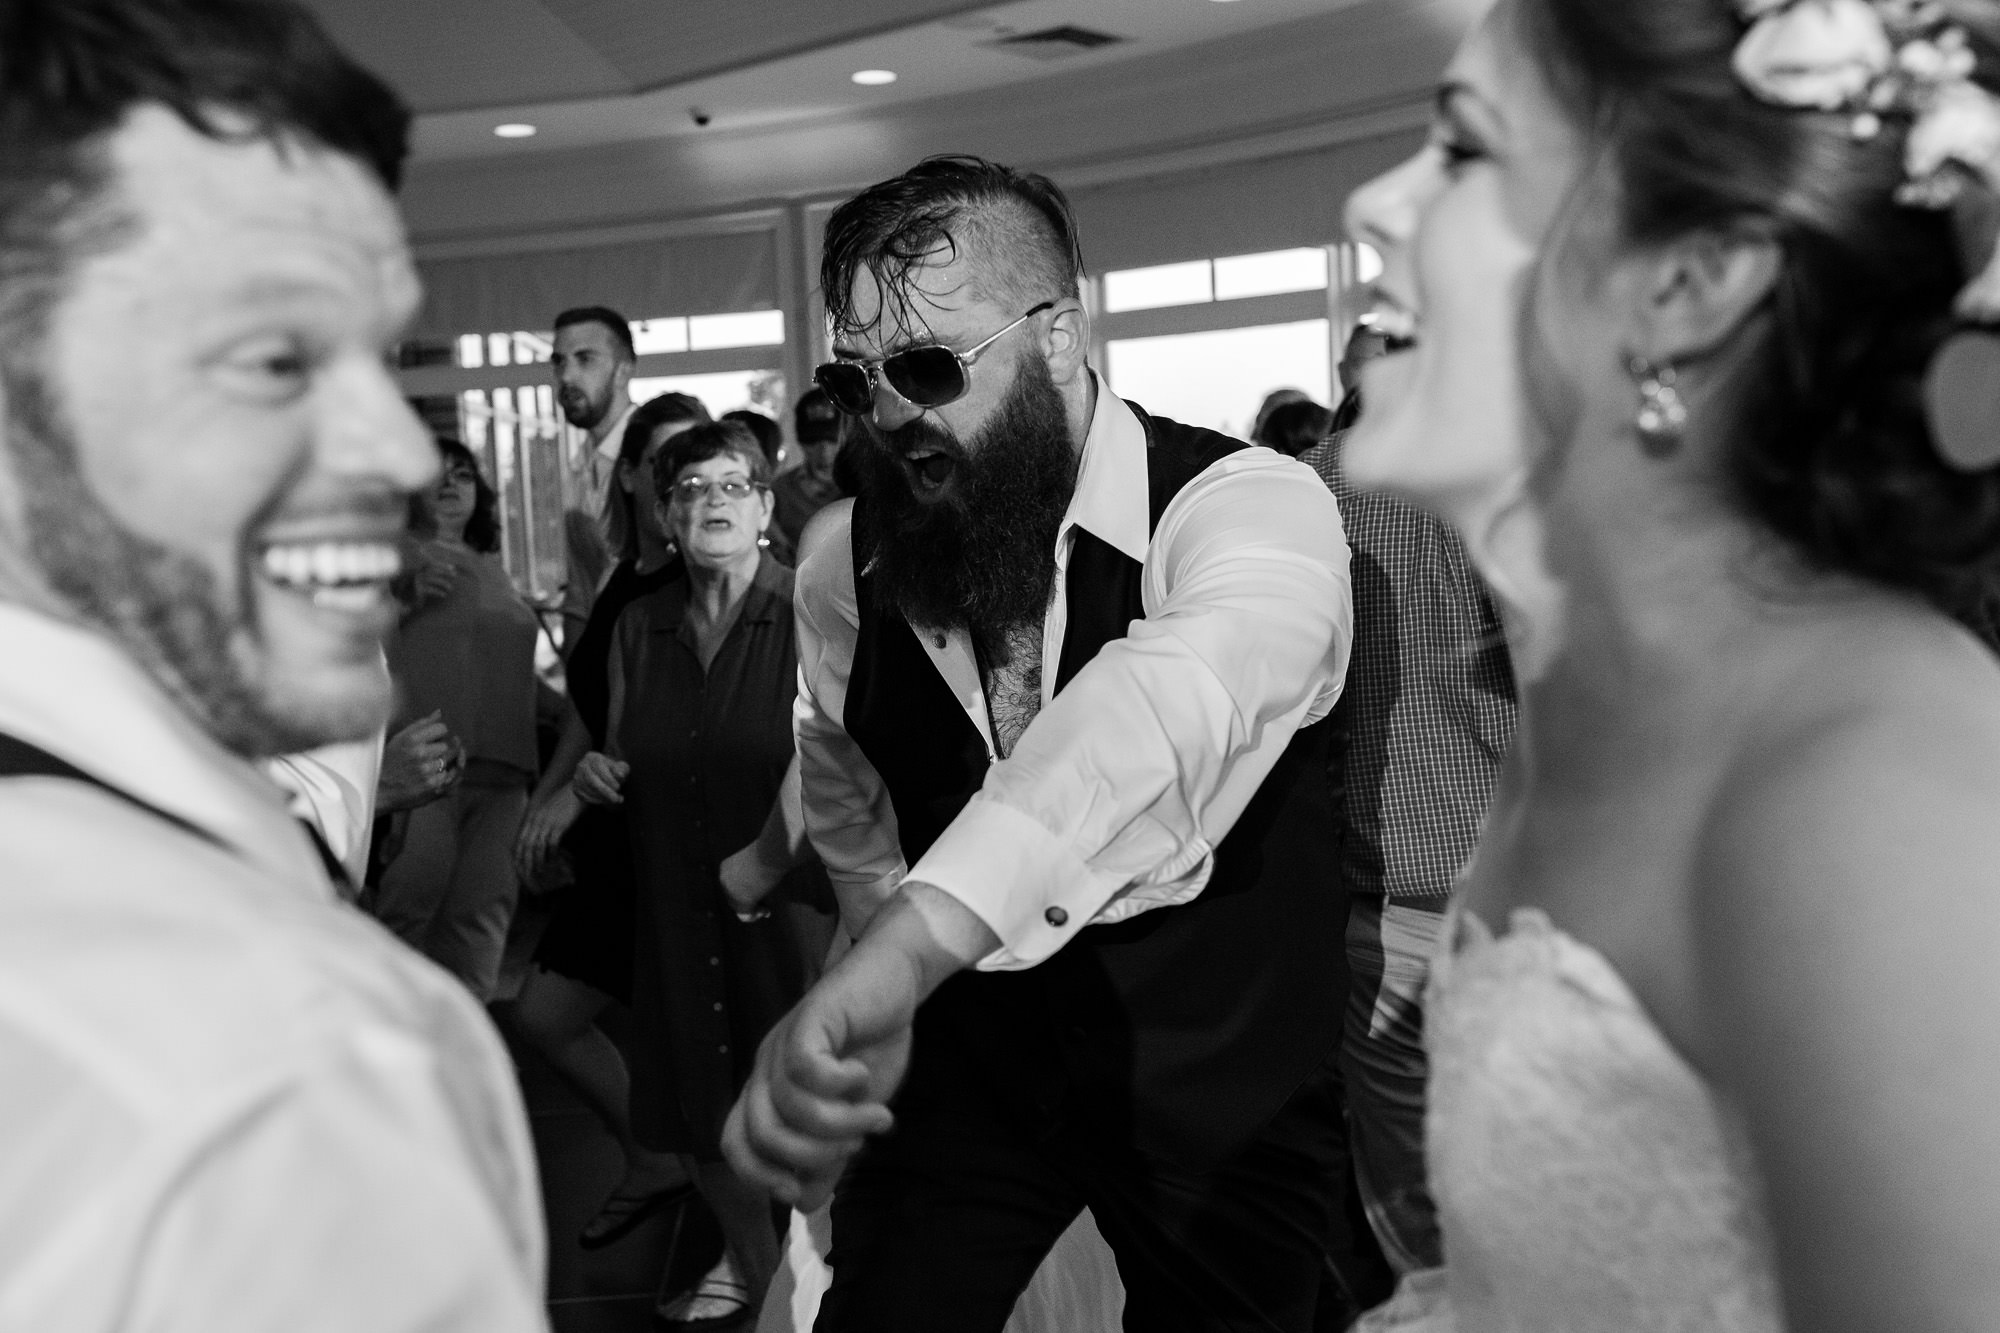 The energetic dance floor at a Point Lookout wedding.